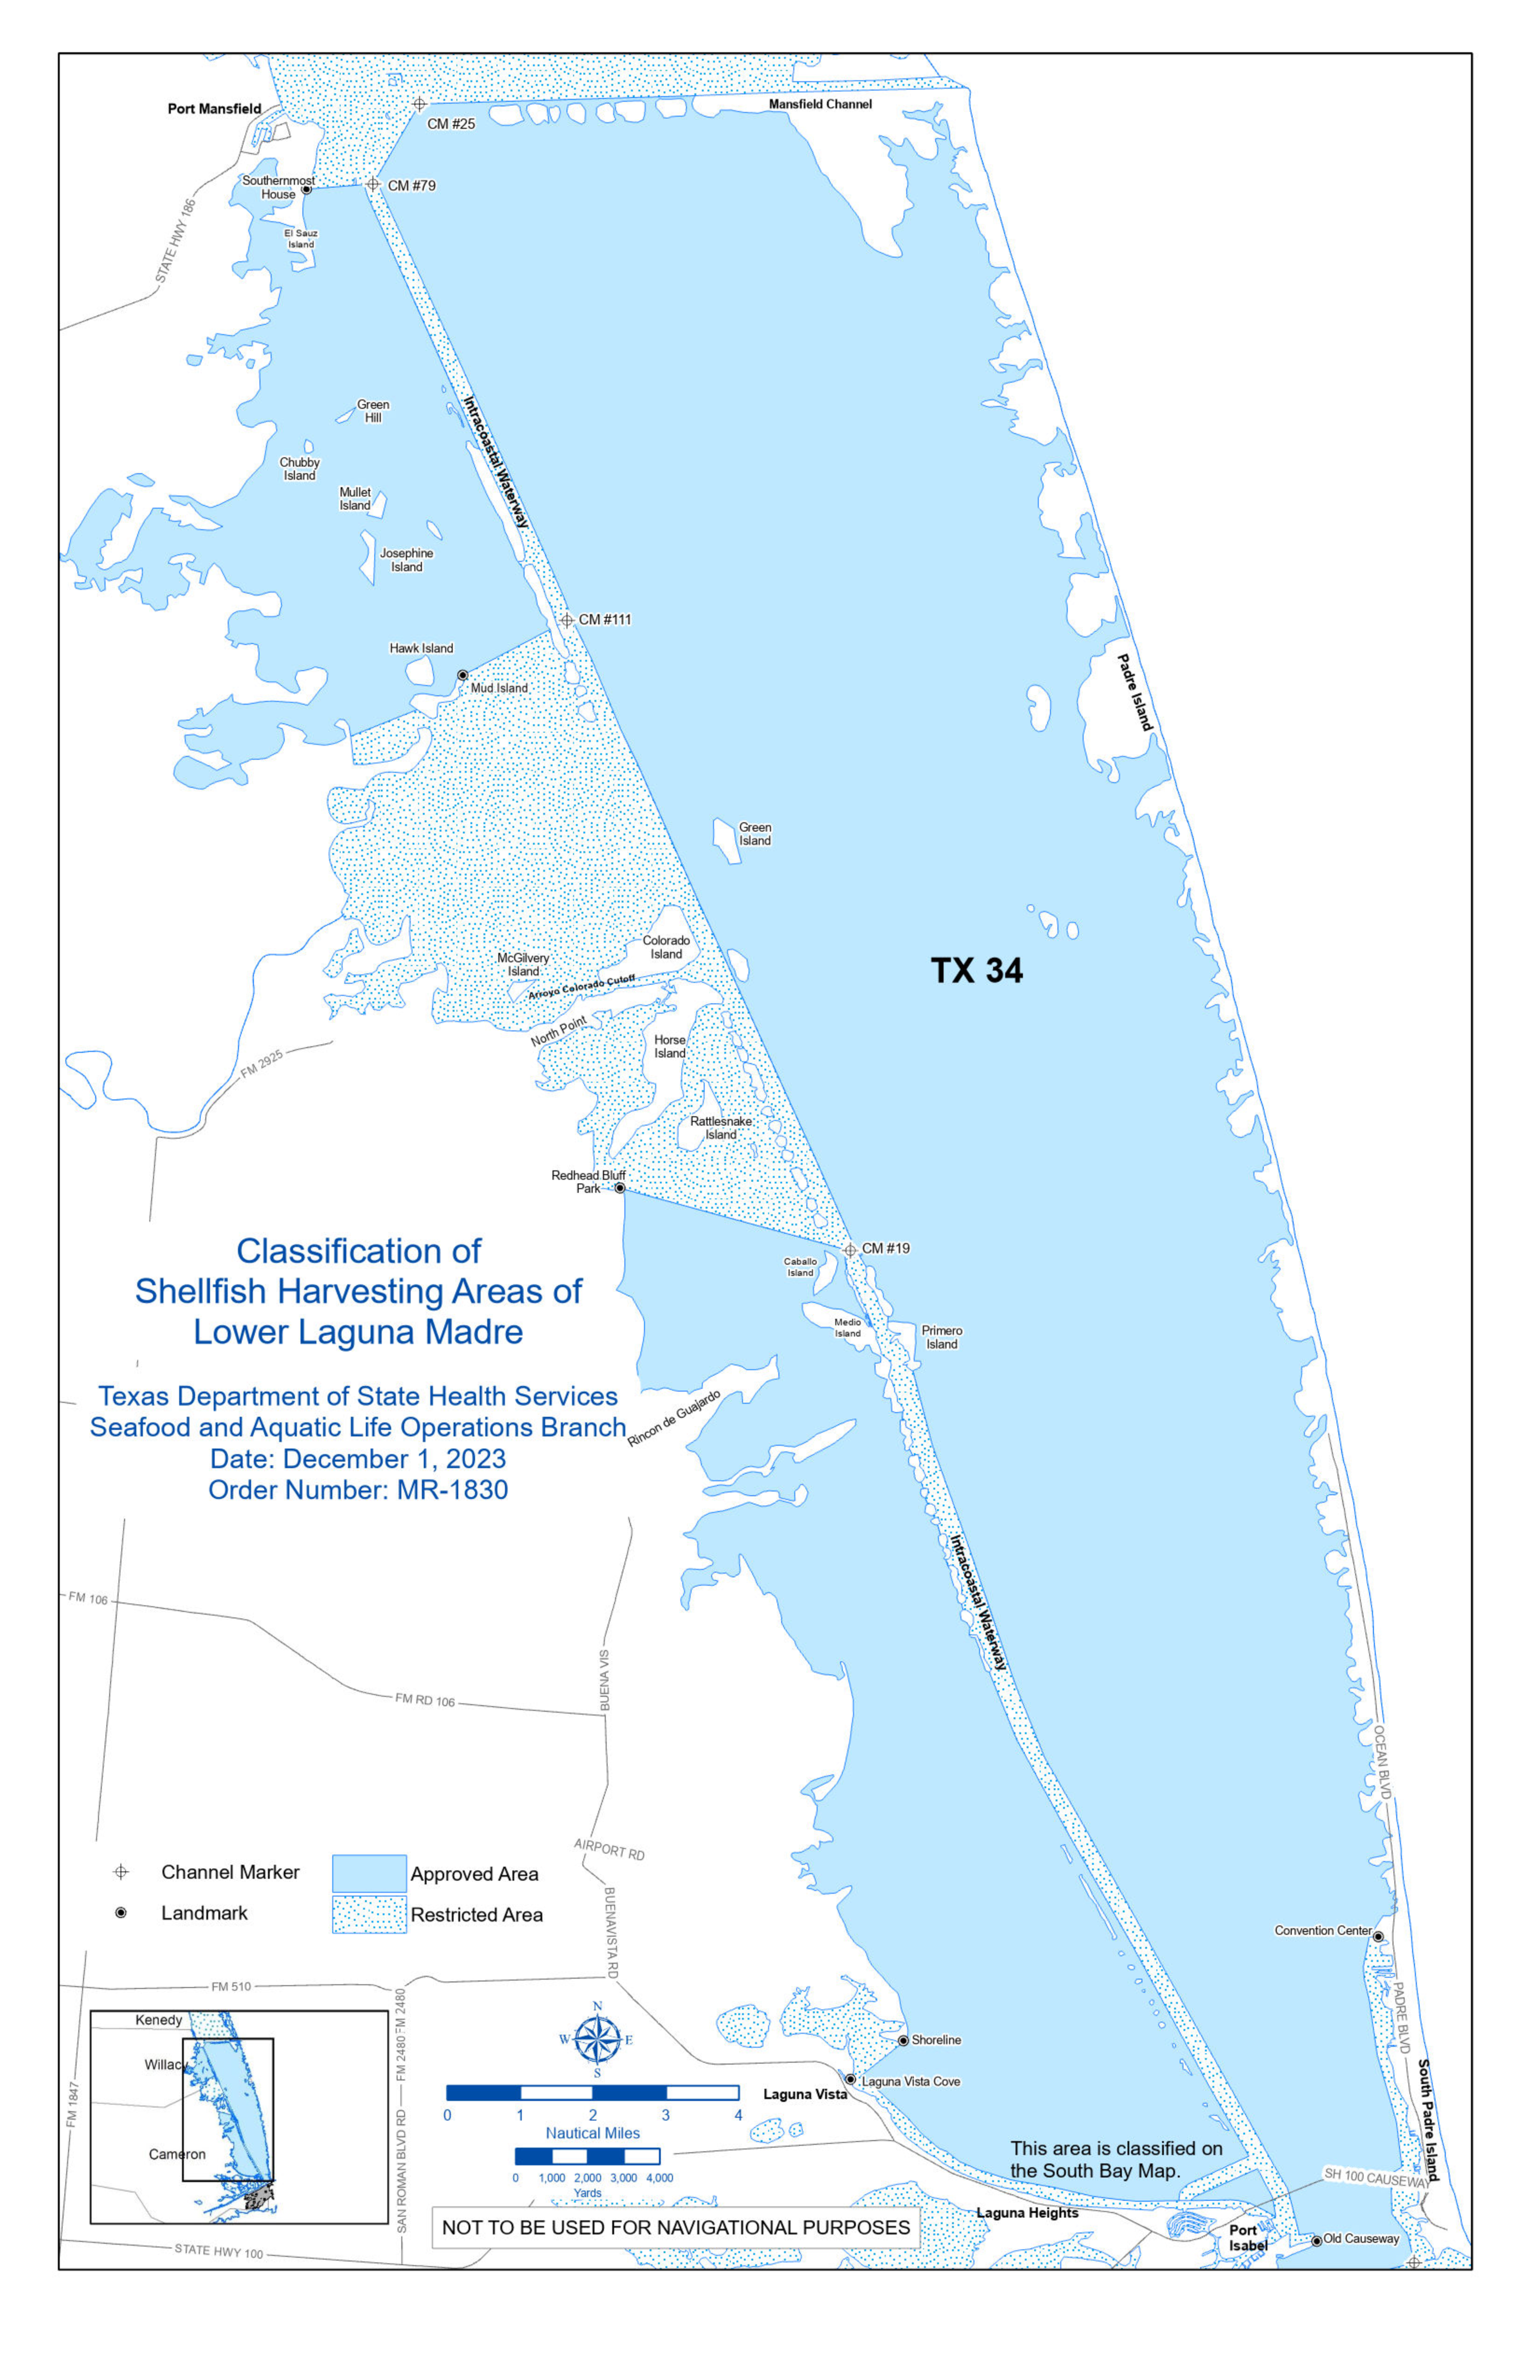 Texas Parks & Wildlife promotes new oyster mariculture